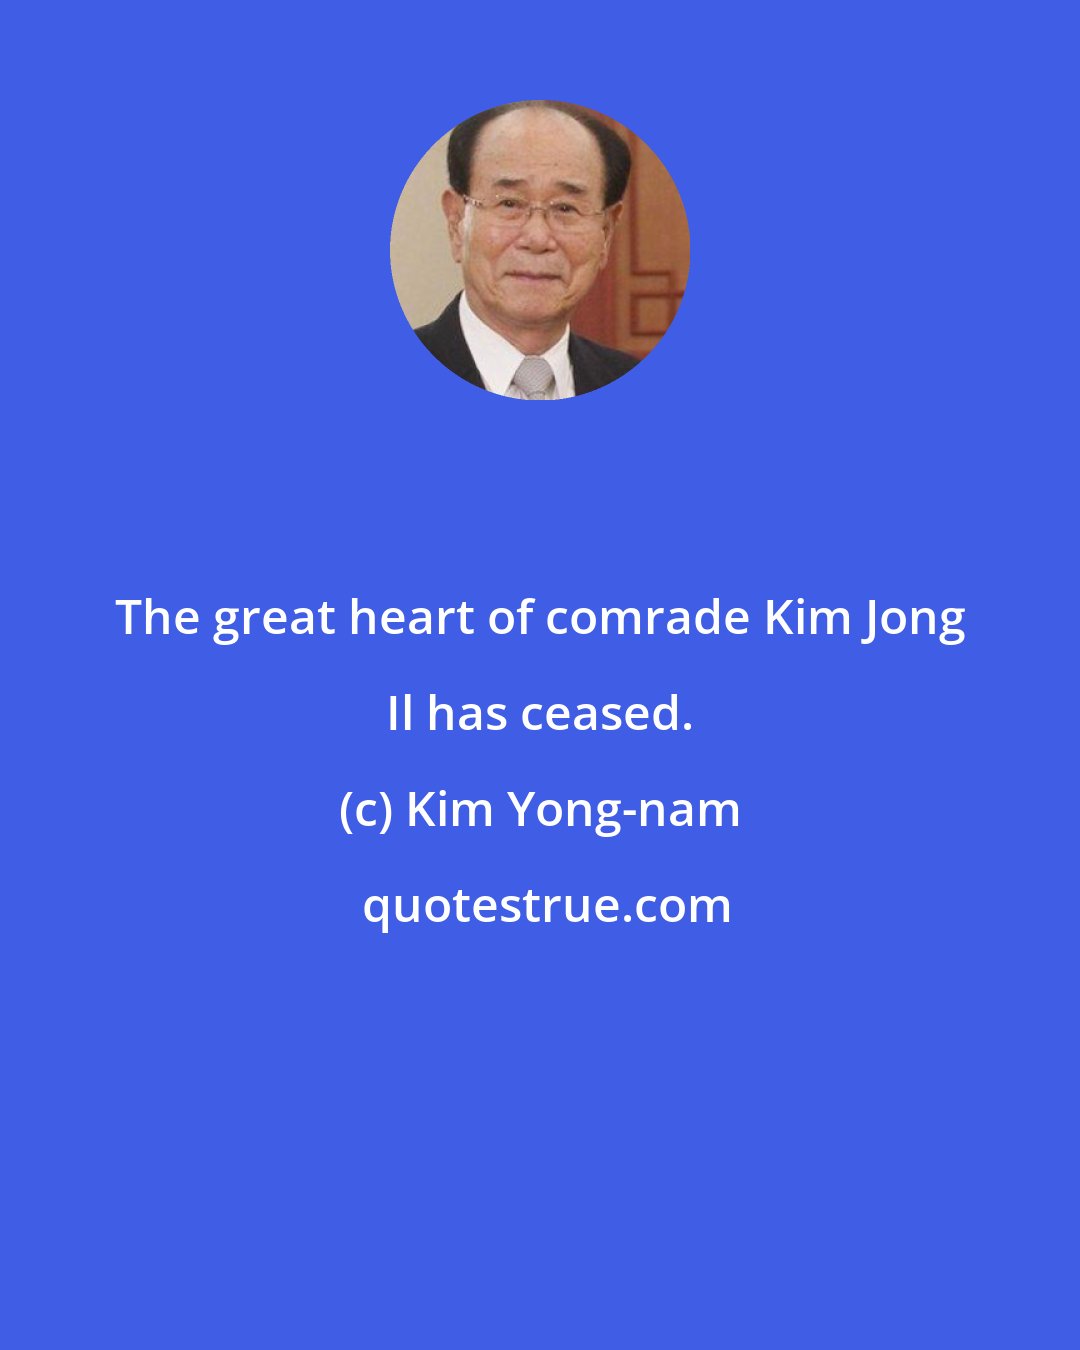 Kim Yong-nam: The great heart of comrade Kim Jong Il has ceased.